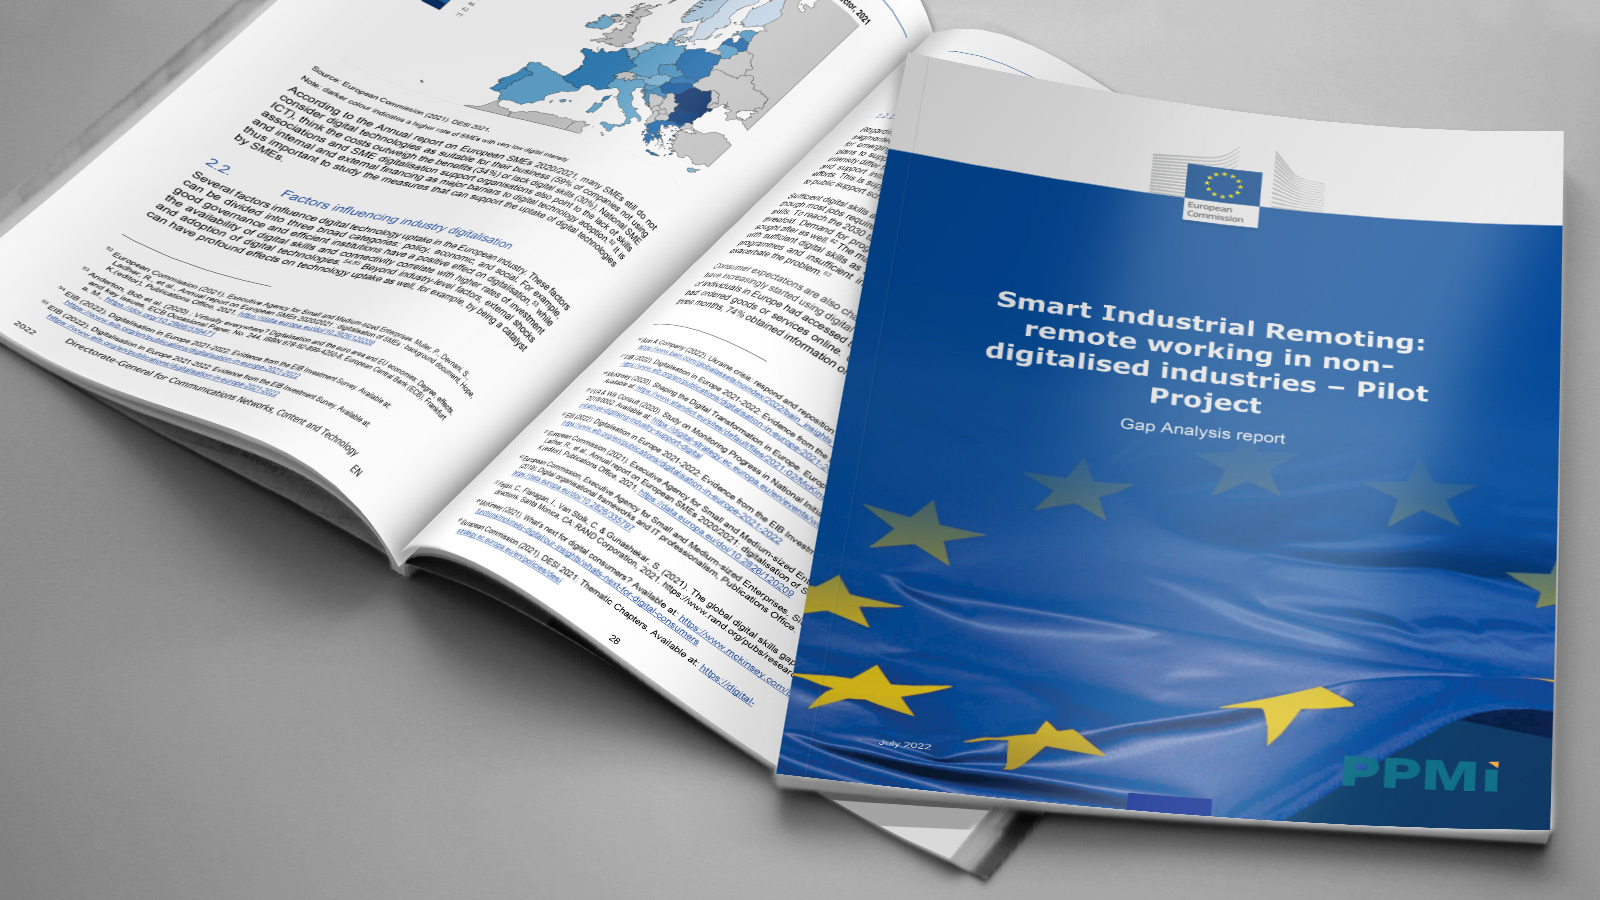 European industry digitalisation – the Gap Analysis report is now published!